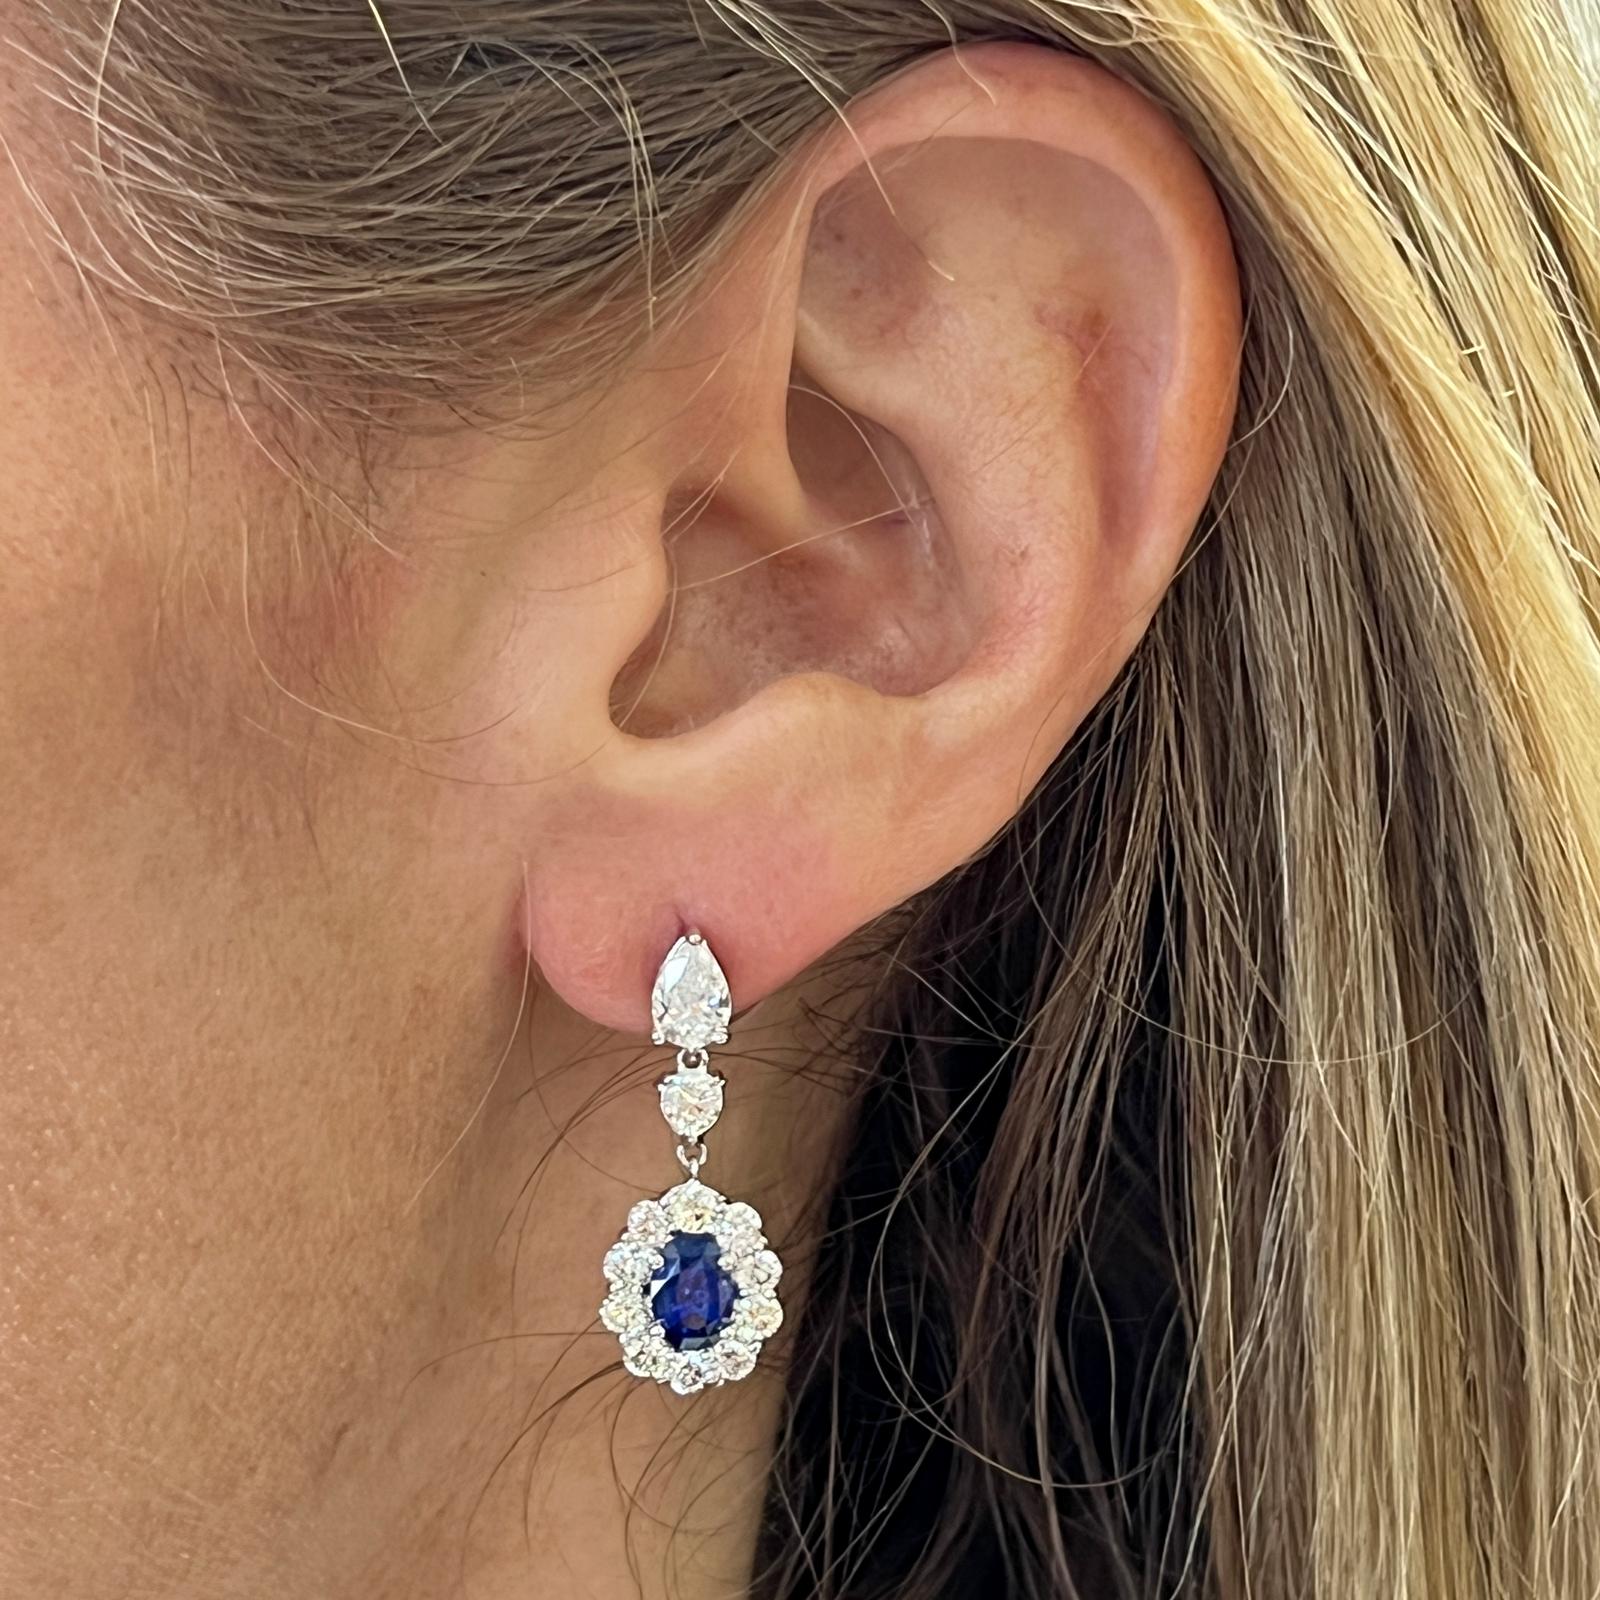 Timeless sapphire diamond drop earrings fashioned in 18 karat white gold. The earrings feature 2 oval natural blue Ceylon sapphires weighing 1.54 carat total weight. The sapphires are surrounded by 22 round brilliant cut diamonds weighing 1.91 CTW,